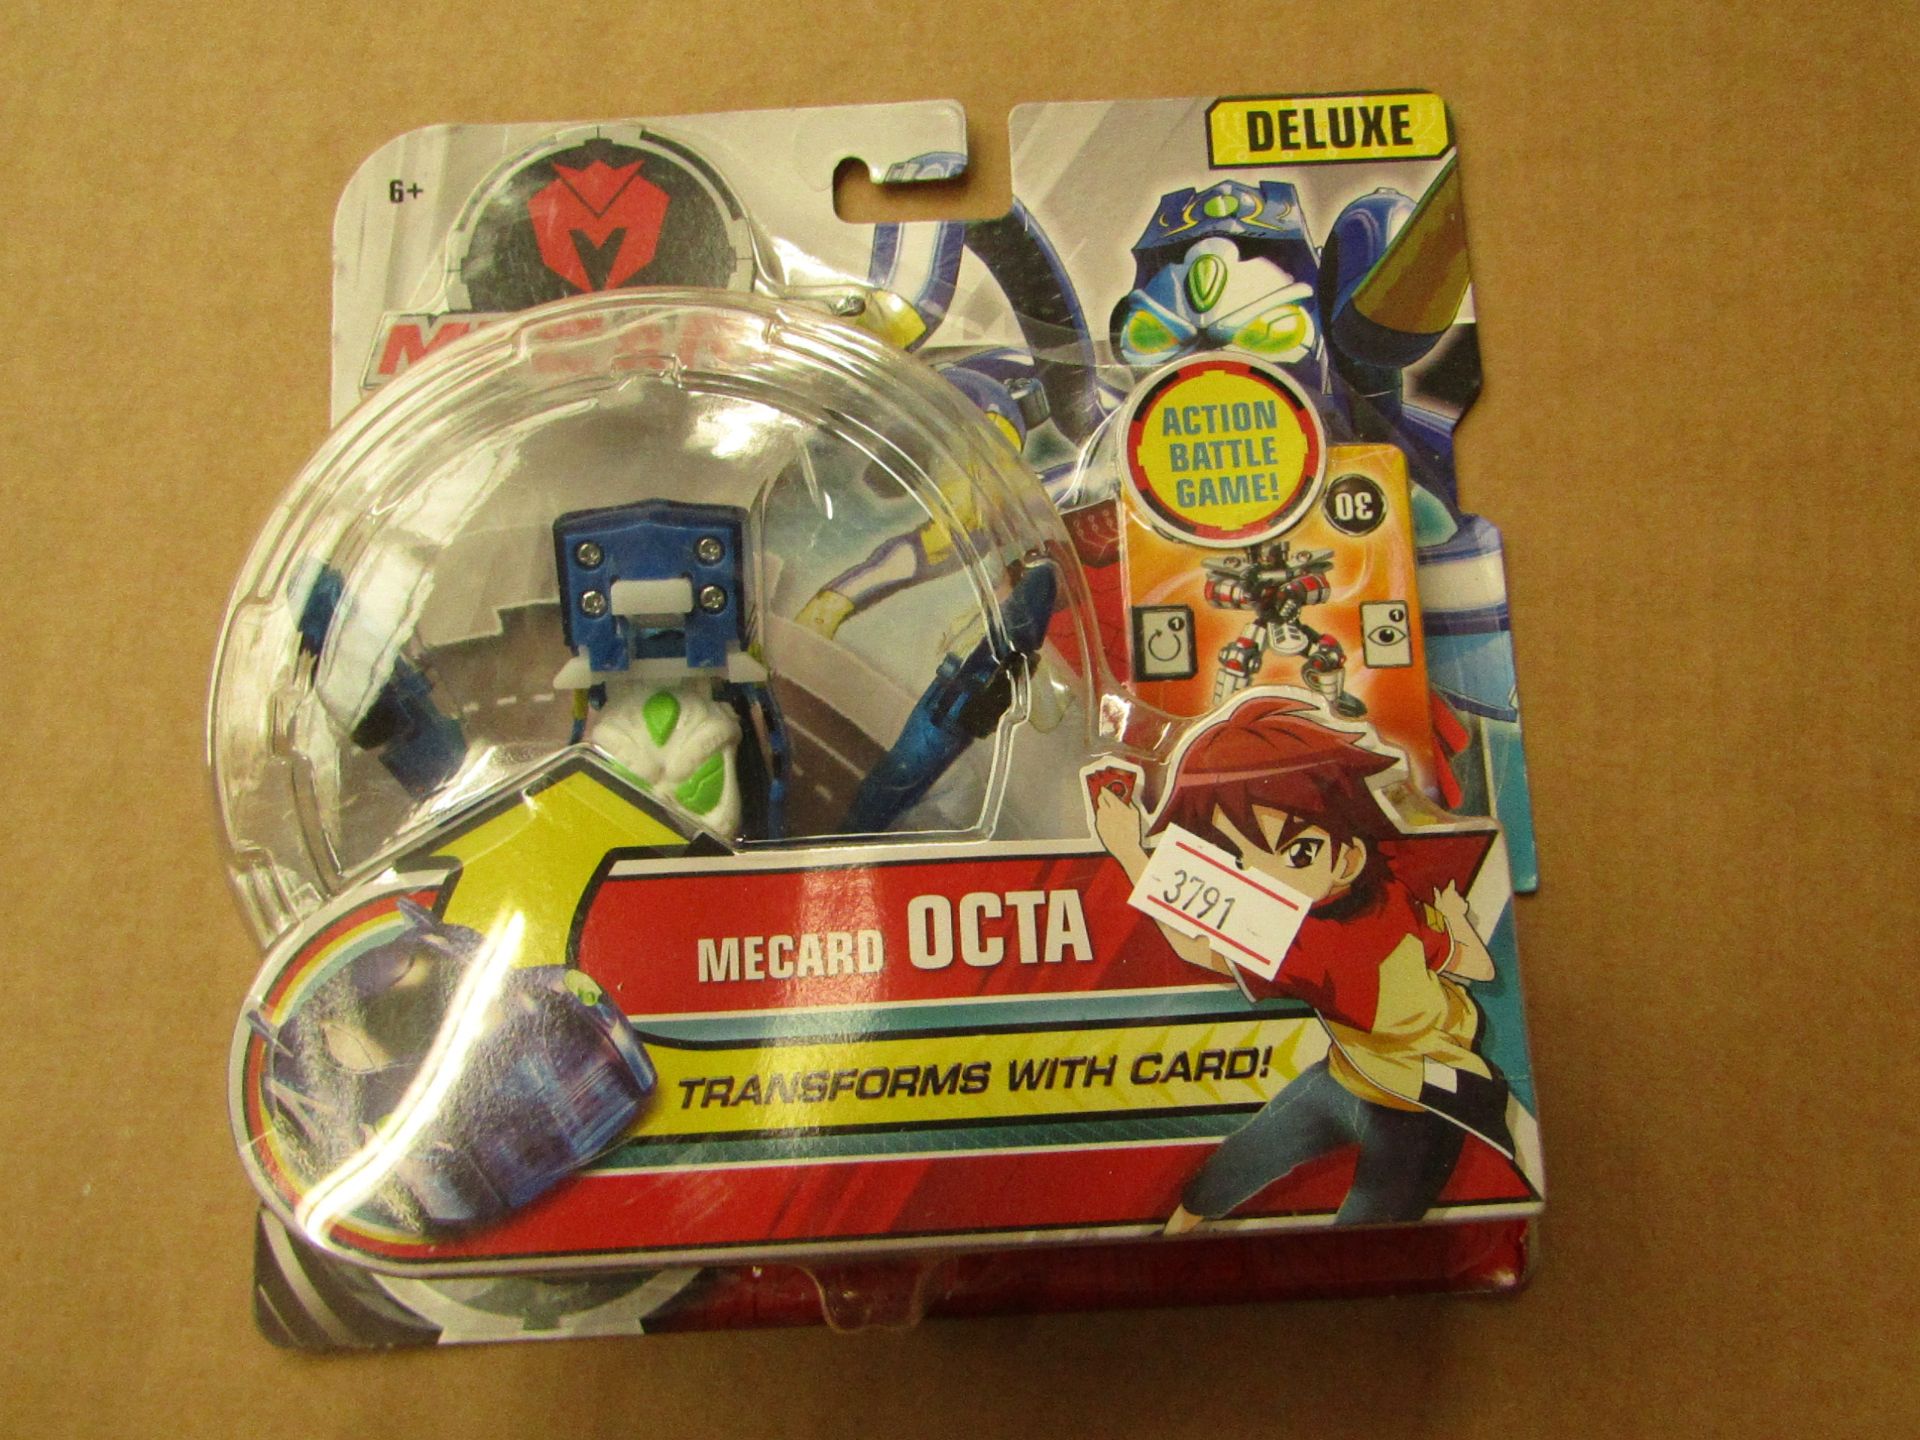 MECARD - Octa Action Battle Game Deluxe - New & Packaged.